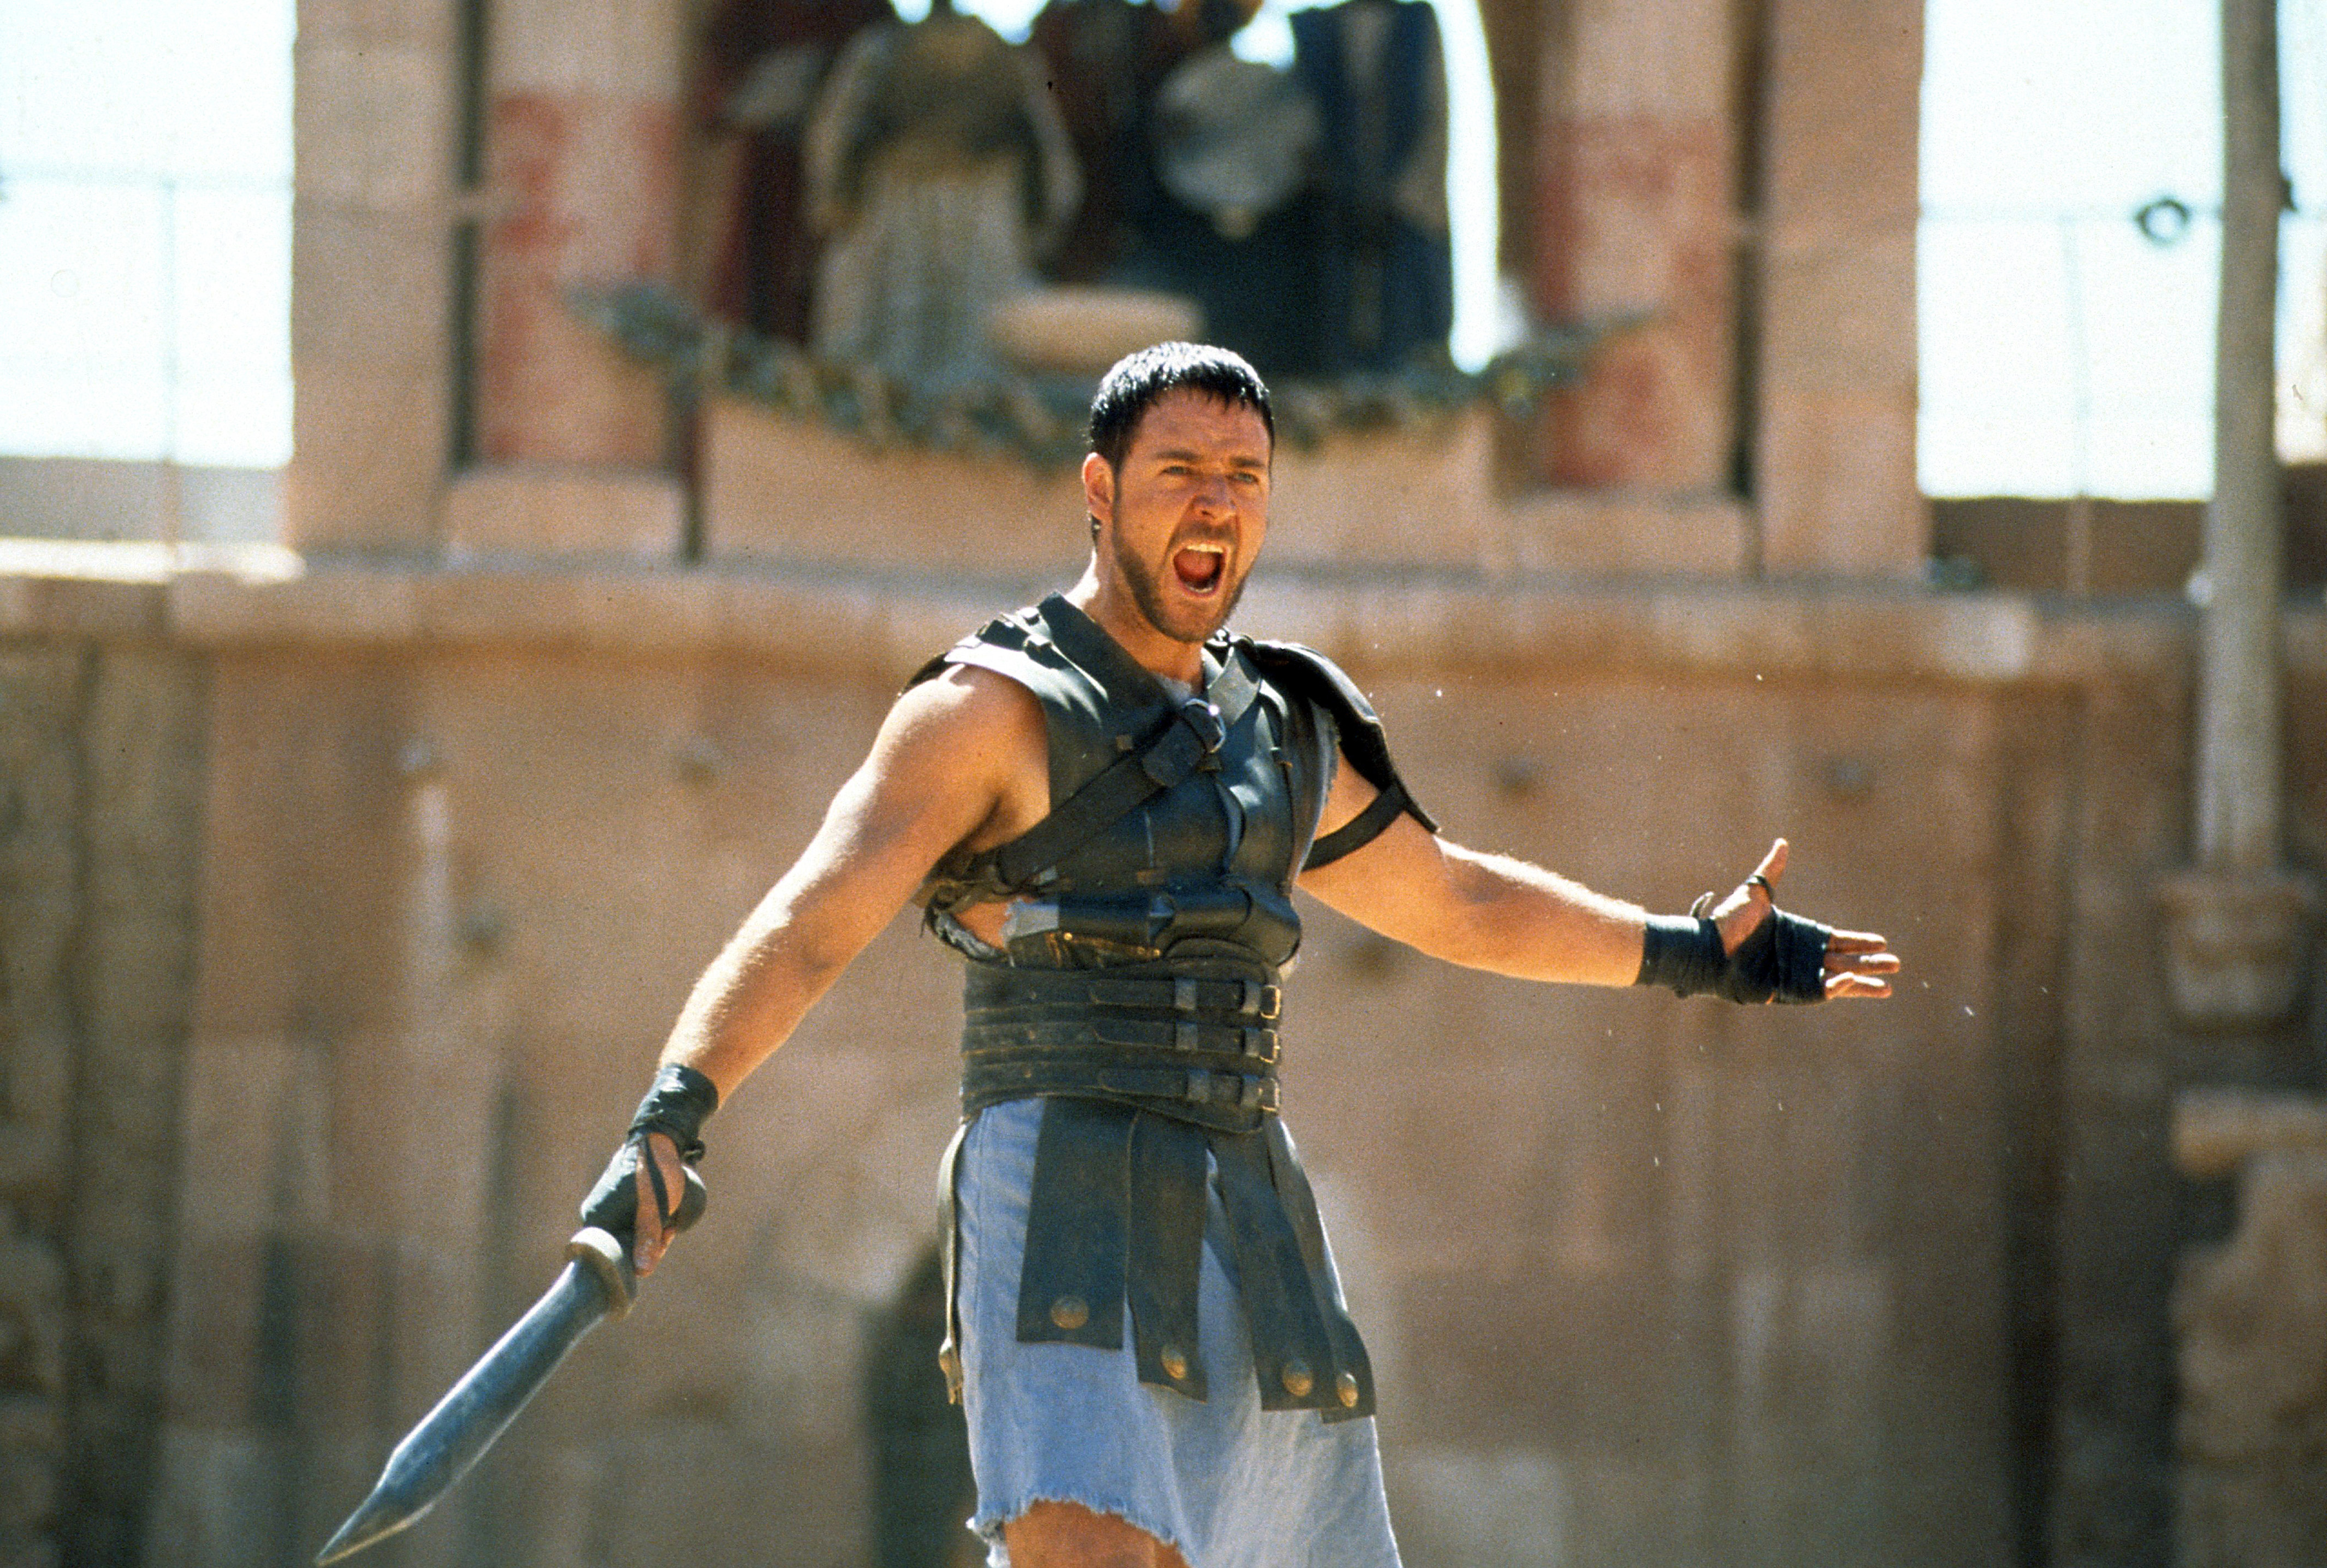 Russell is best known for starring in the epic movie, Gladiator